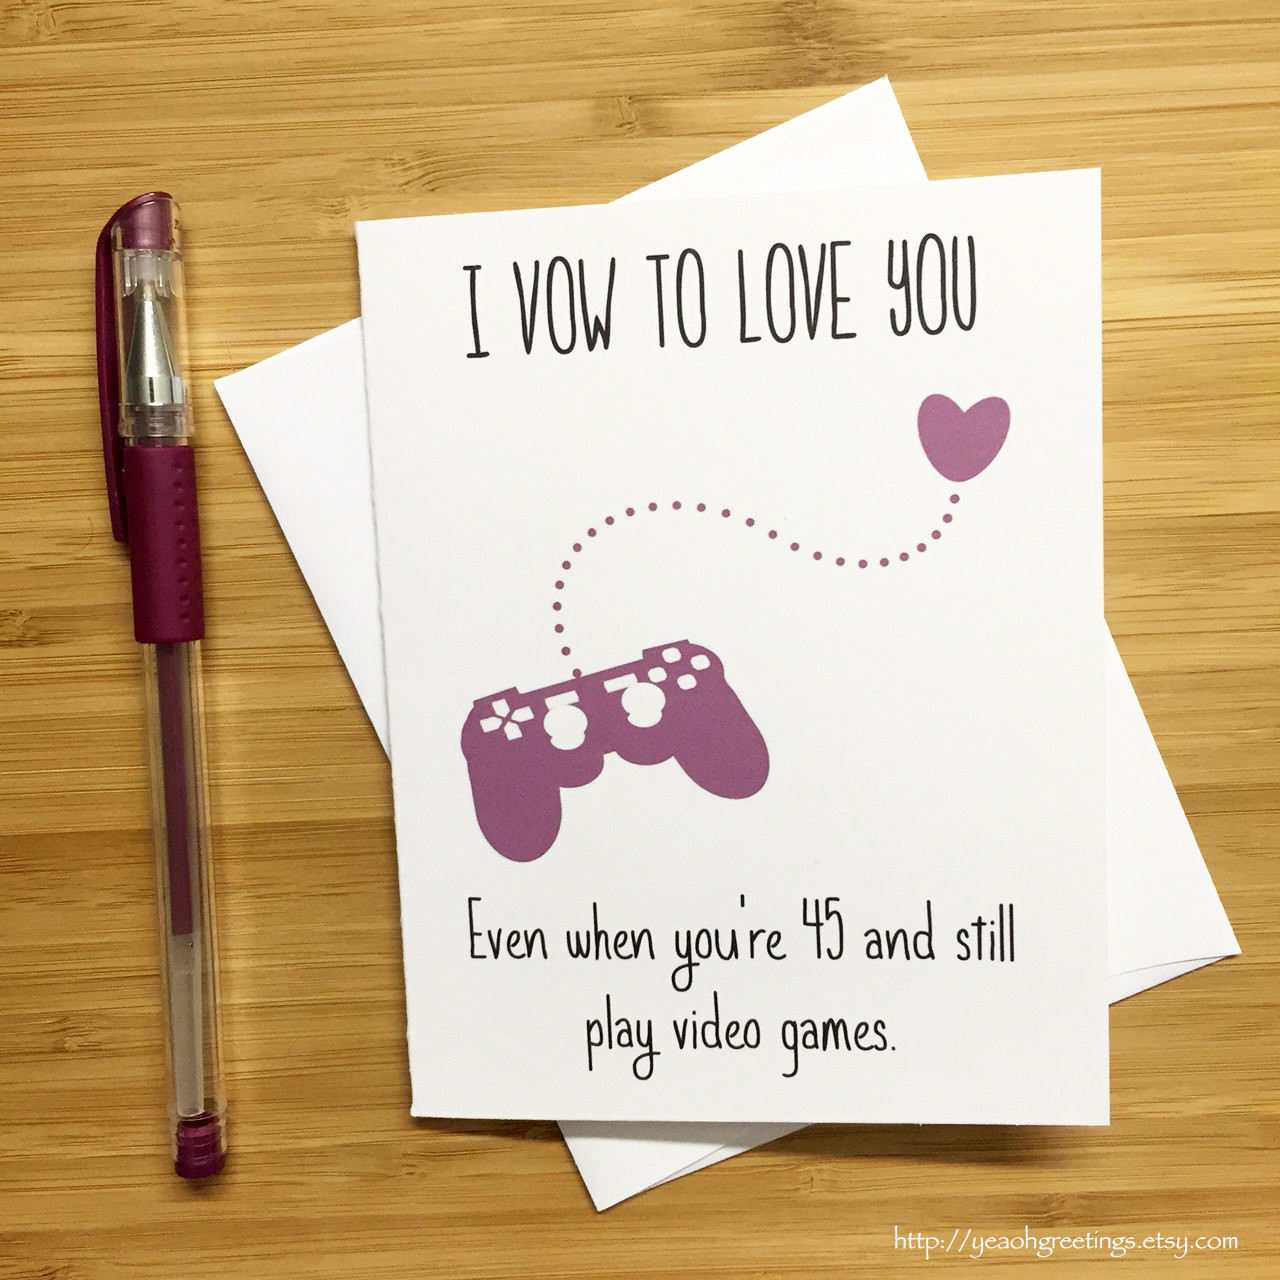 Gift Certificate Ideas For Couples
 Cute Love Card for Video Game Lovers Happy Anniversary Card